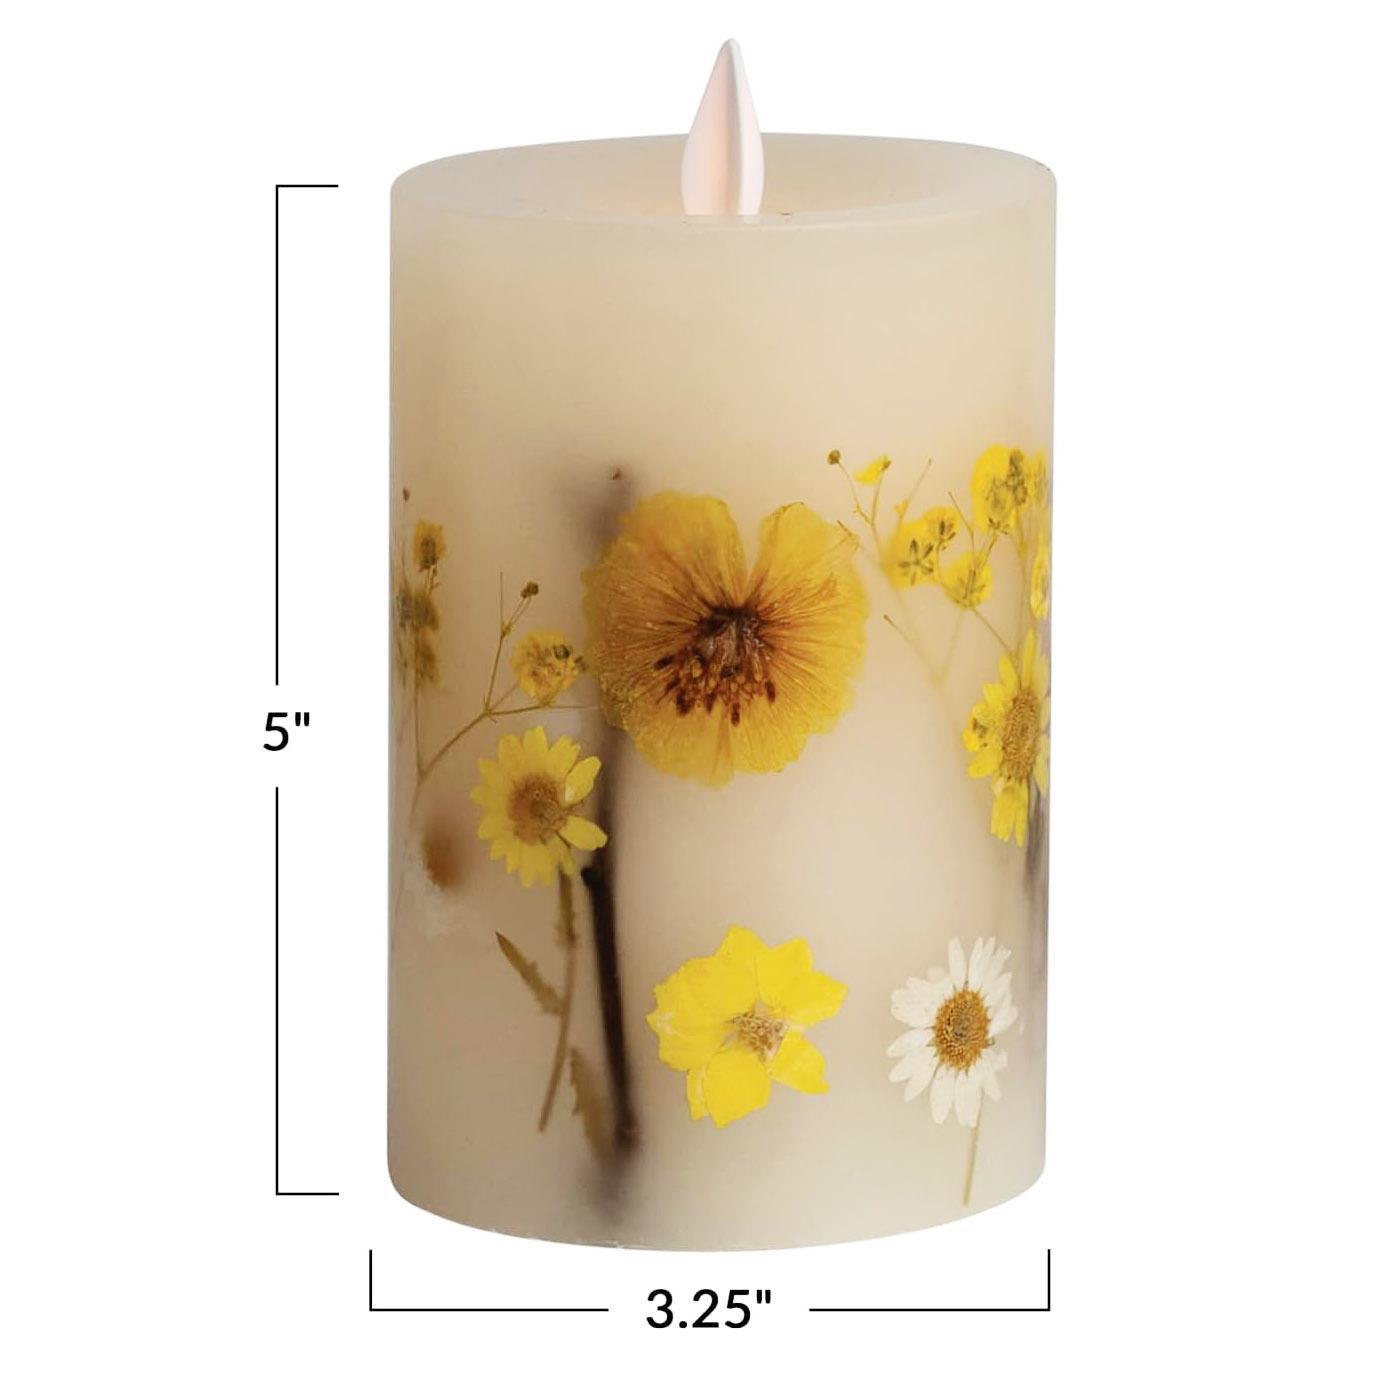 Pillar Daisy Inlay LED Candle with Timer 5 inch tall by 3.25 wide